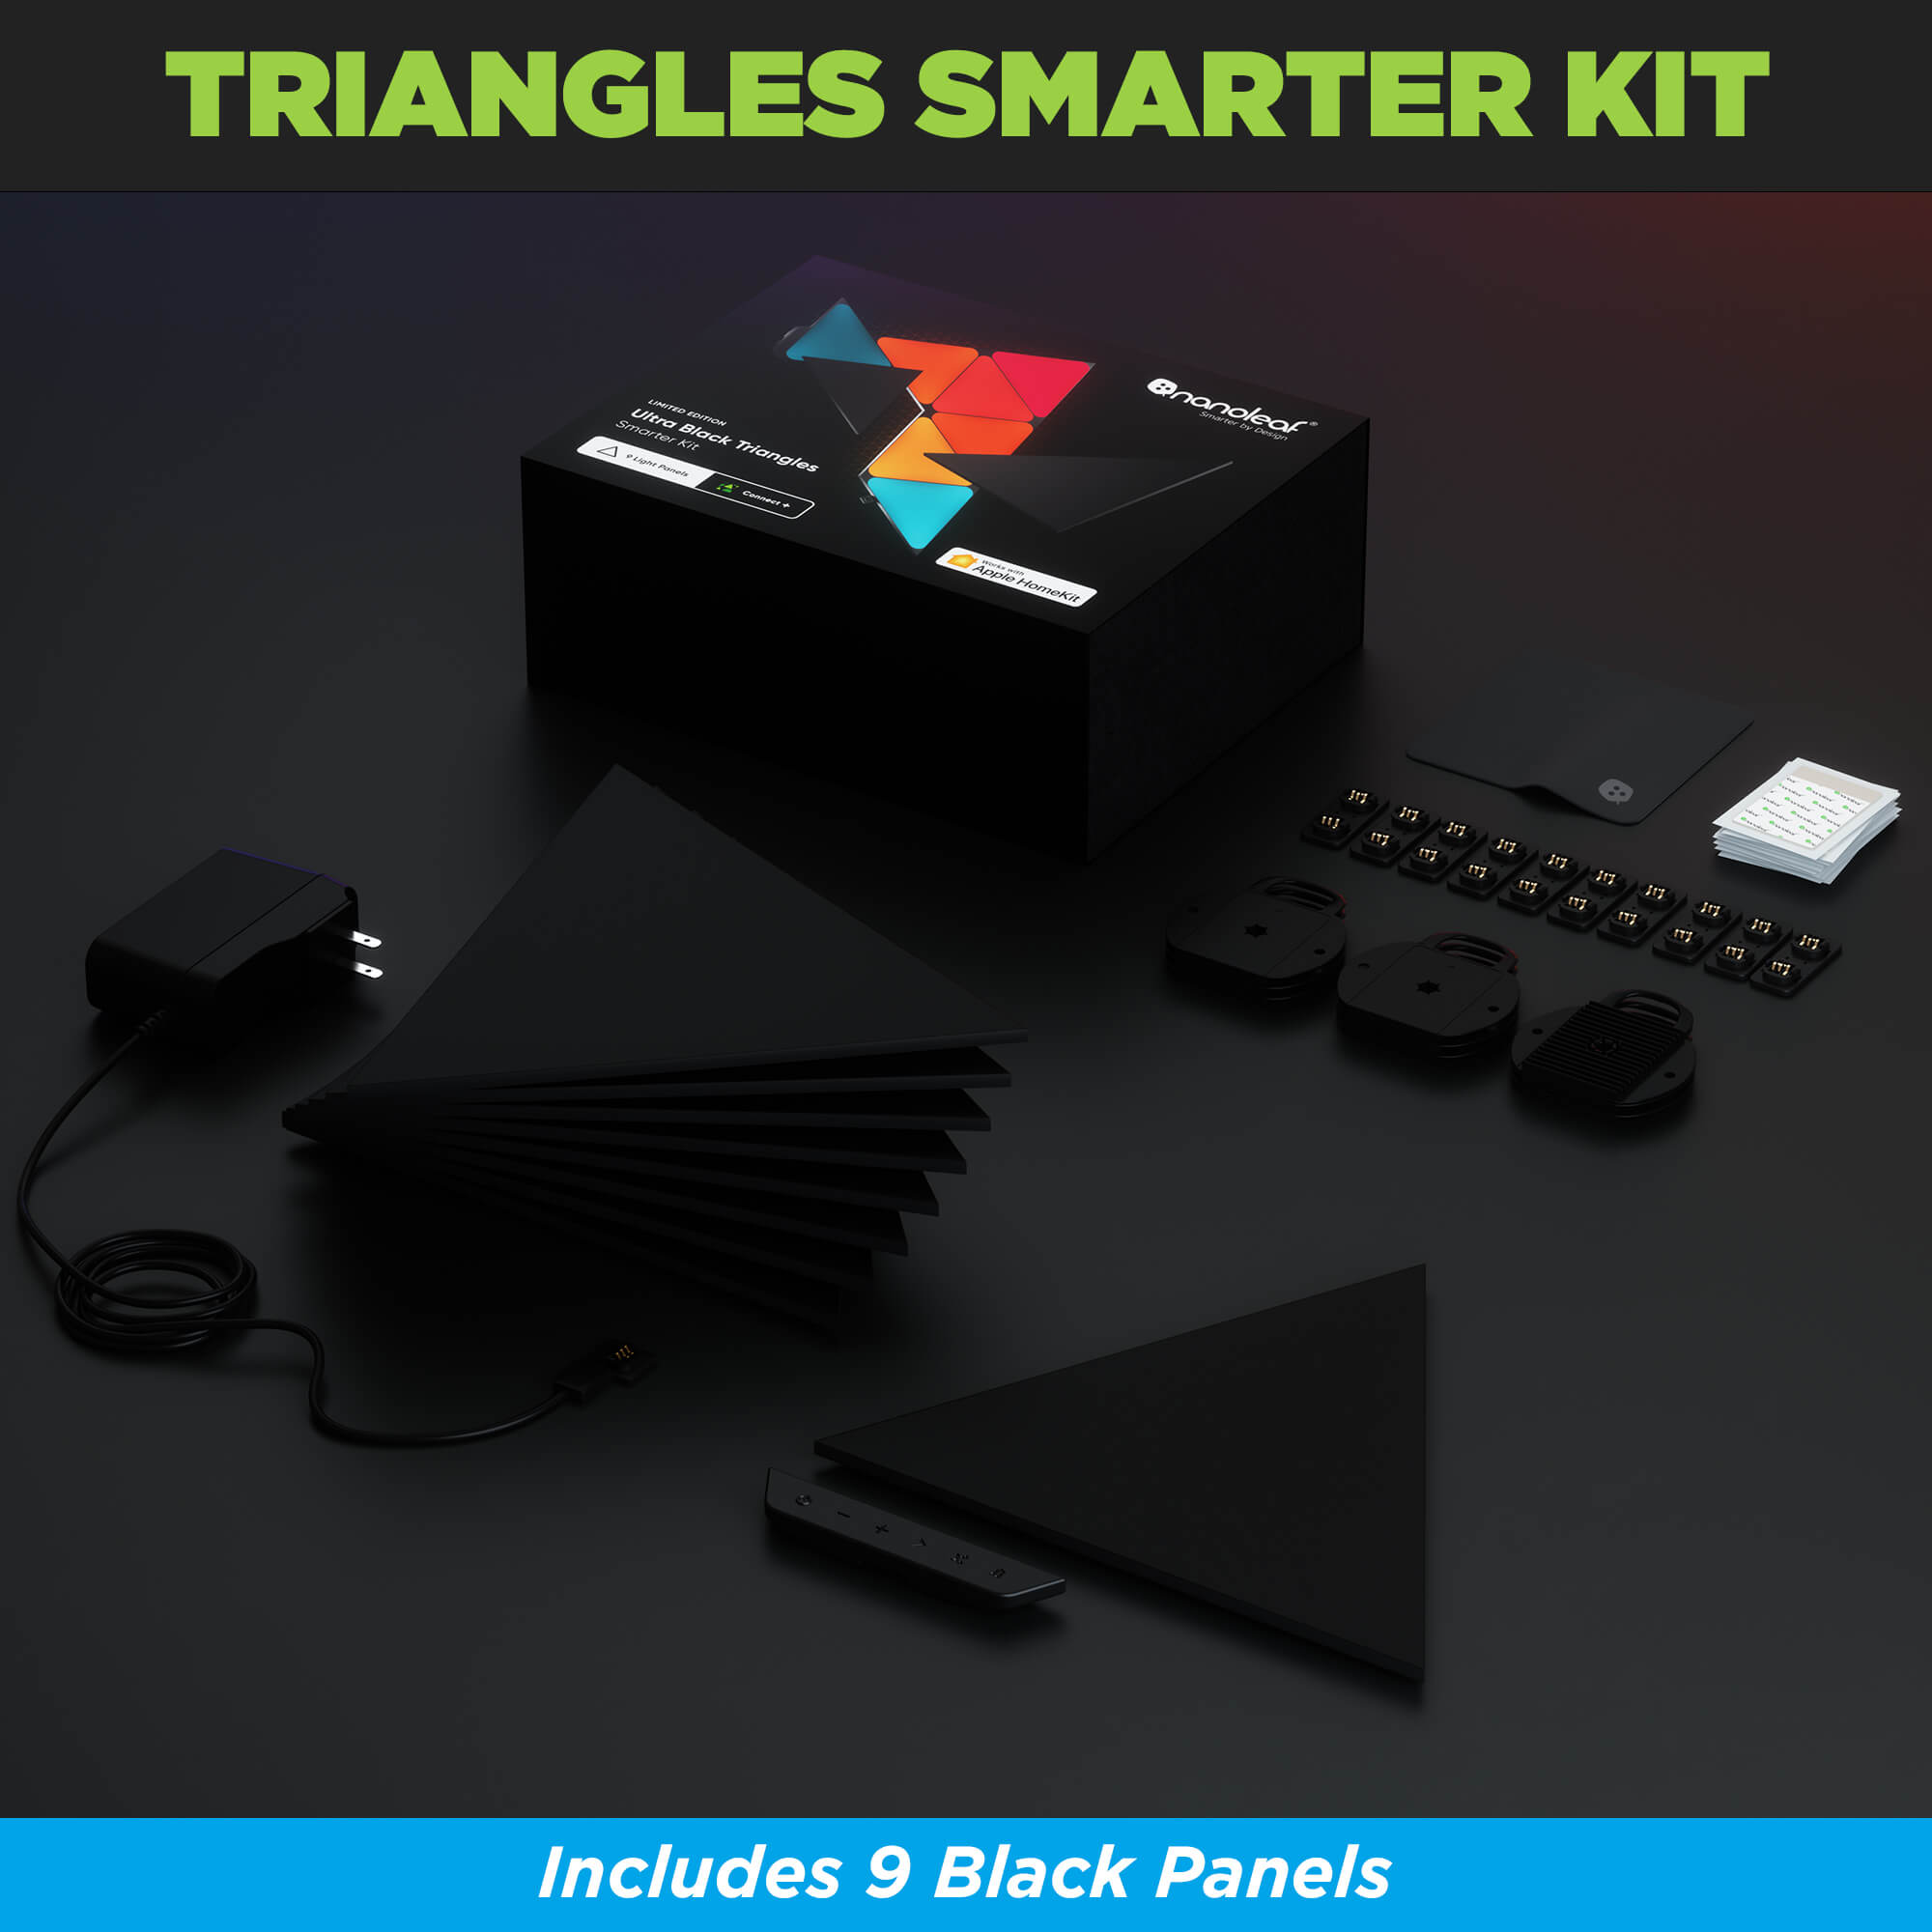 Ultra Black Triangles Smarter Kit from Nanoleaf comes with 9 panels.